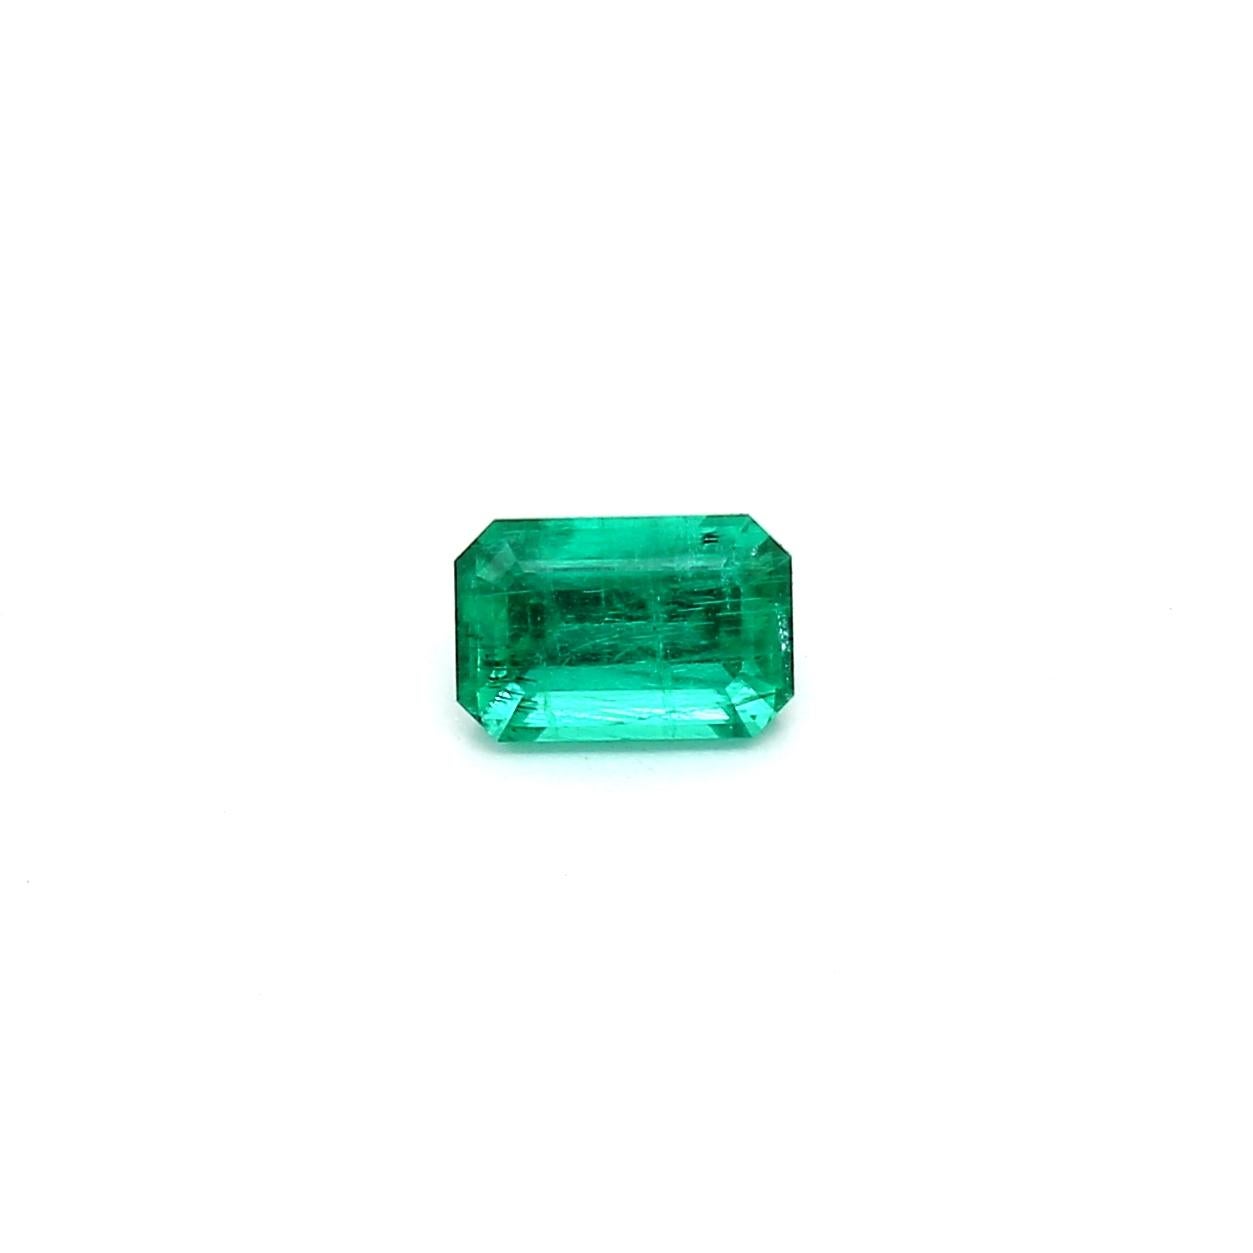 An amazing Russian Emerald which allows jewelers to create a unique piece of wearable art.
This exceptional quality gemstone would make a custom-made jewelry design. Perfect for a Ring or Pendant.

Shape - Octagon
Weight - 0.51 ct
Treatment -